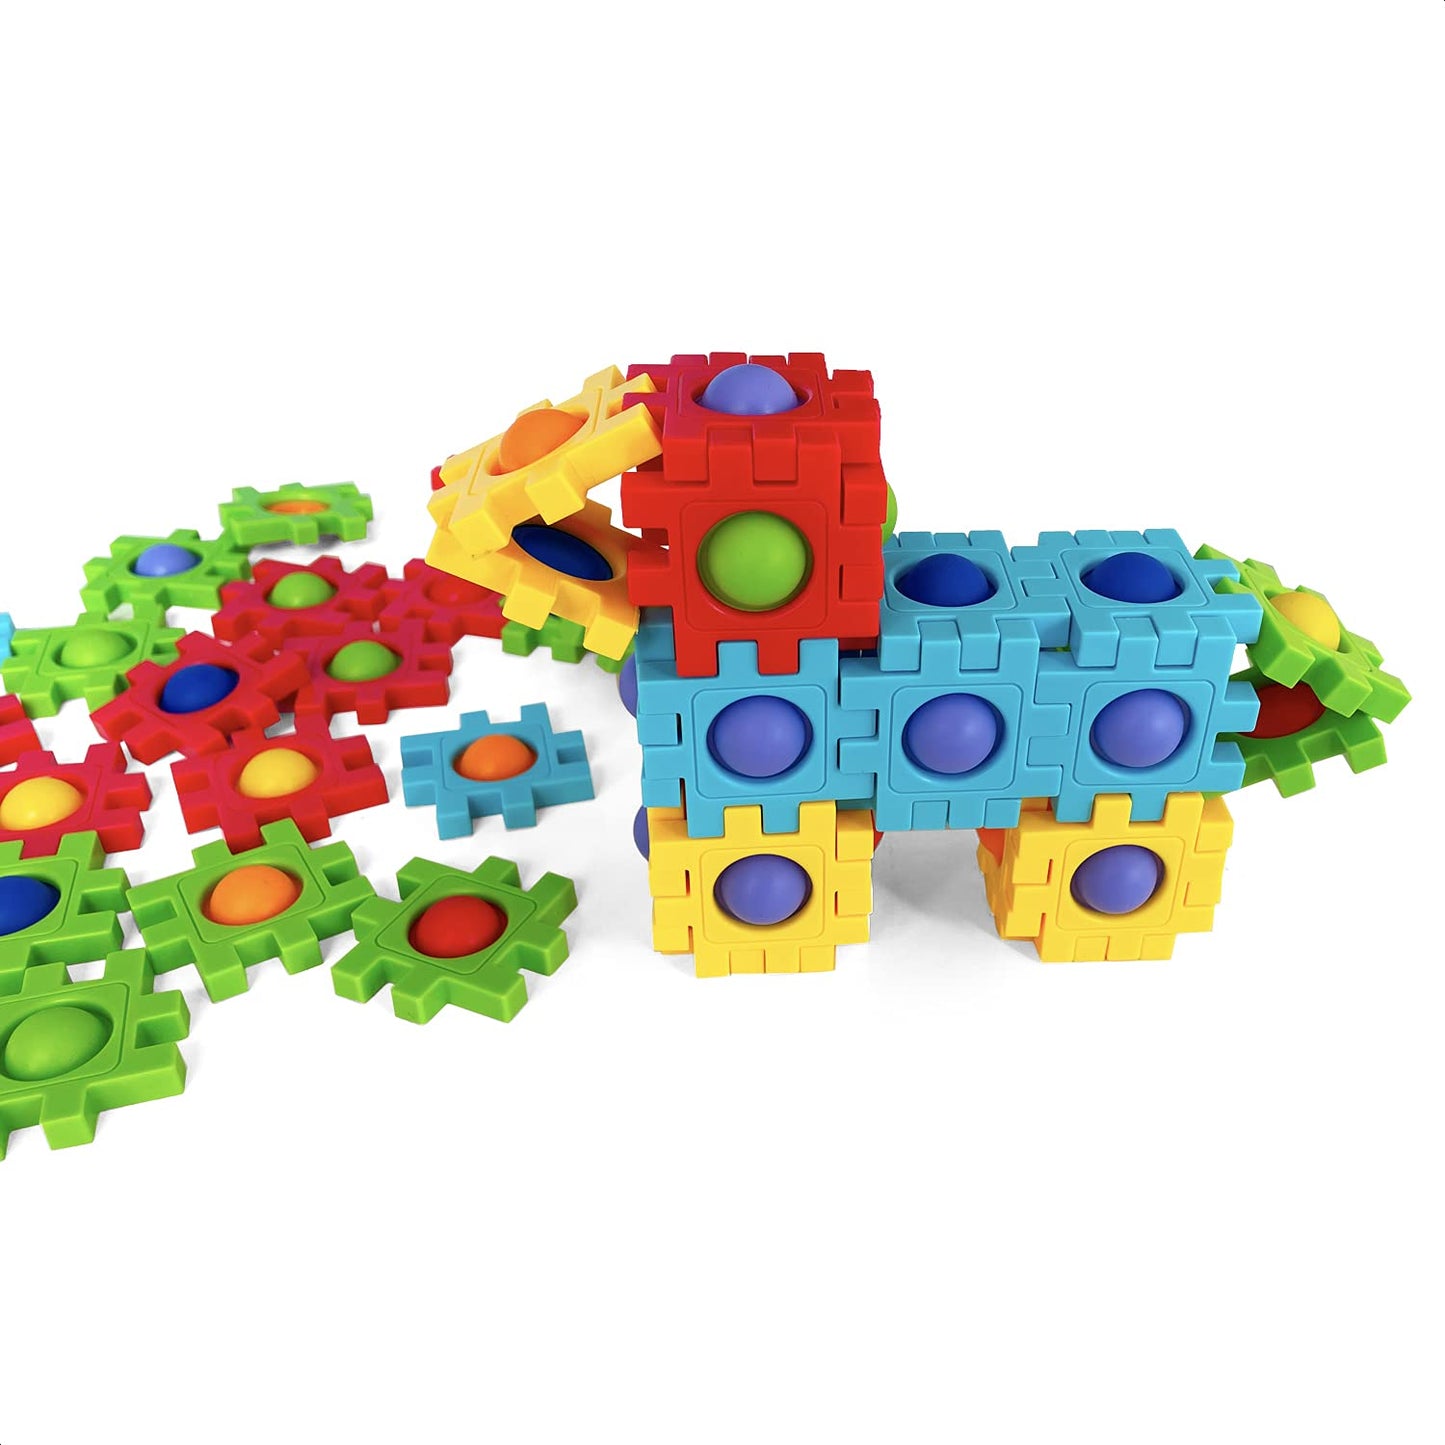 Anlabay Two-in-One Pop Blocks Pop Puzzle 48PCS, Jigsaw Puzzles, STEM Toys for 4 5 6 7 8 Year Old Kids, Bubble Popping Sensory Toy, Autism Sensory Toys for Autistic Children (Bubbles)